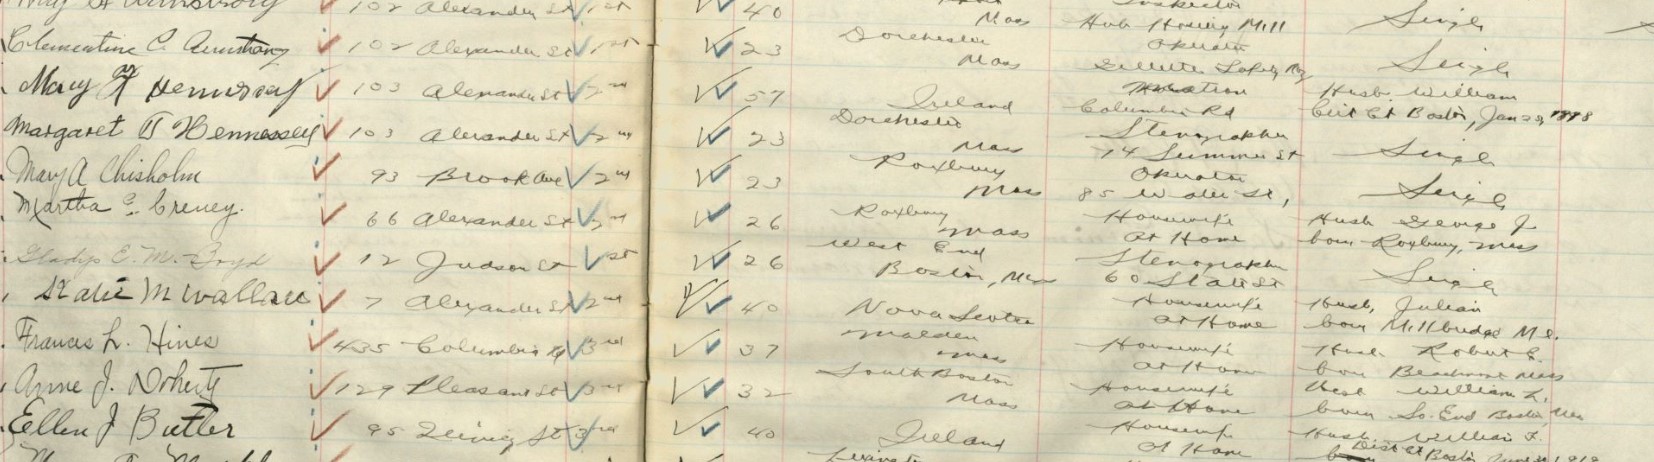 Excerpt from Ward 17, Volume 1A of the General Register of Women Voters showing the entries for Mary F. Hennessey and her daughter Margaret T. Hennessey 